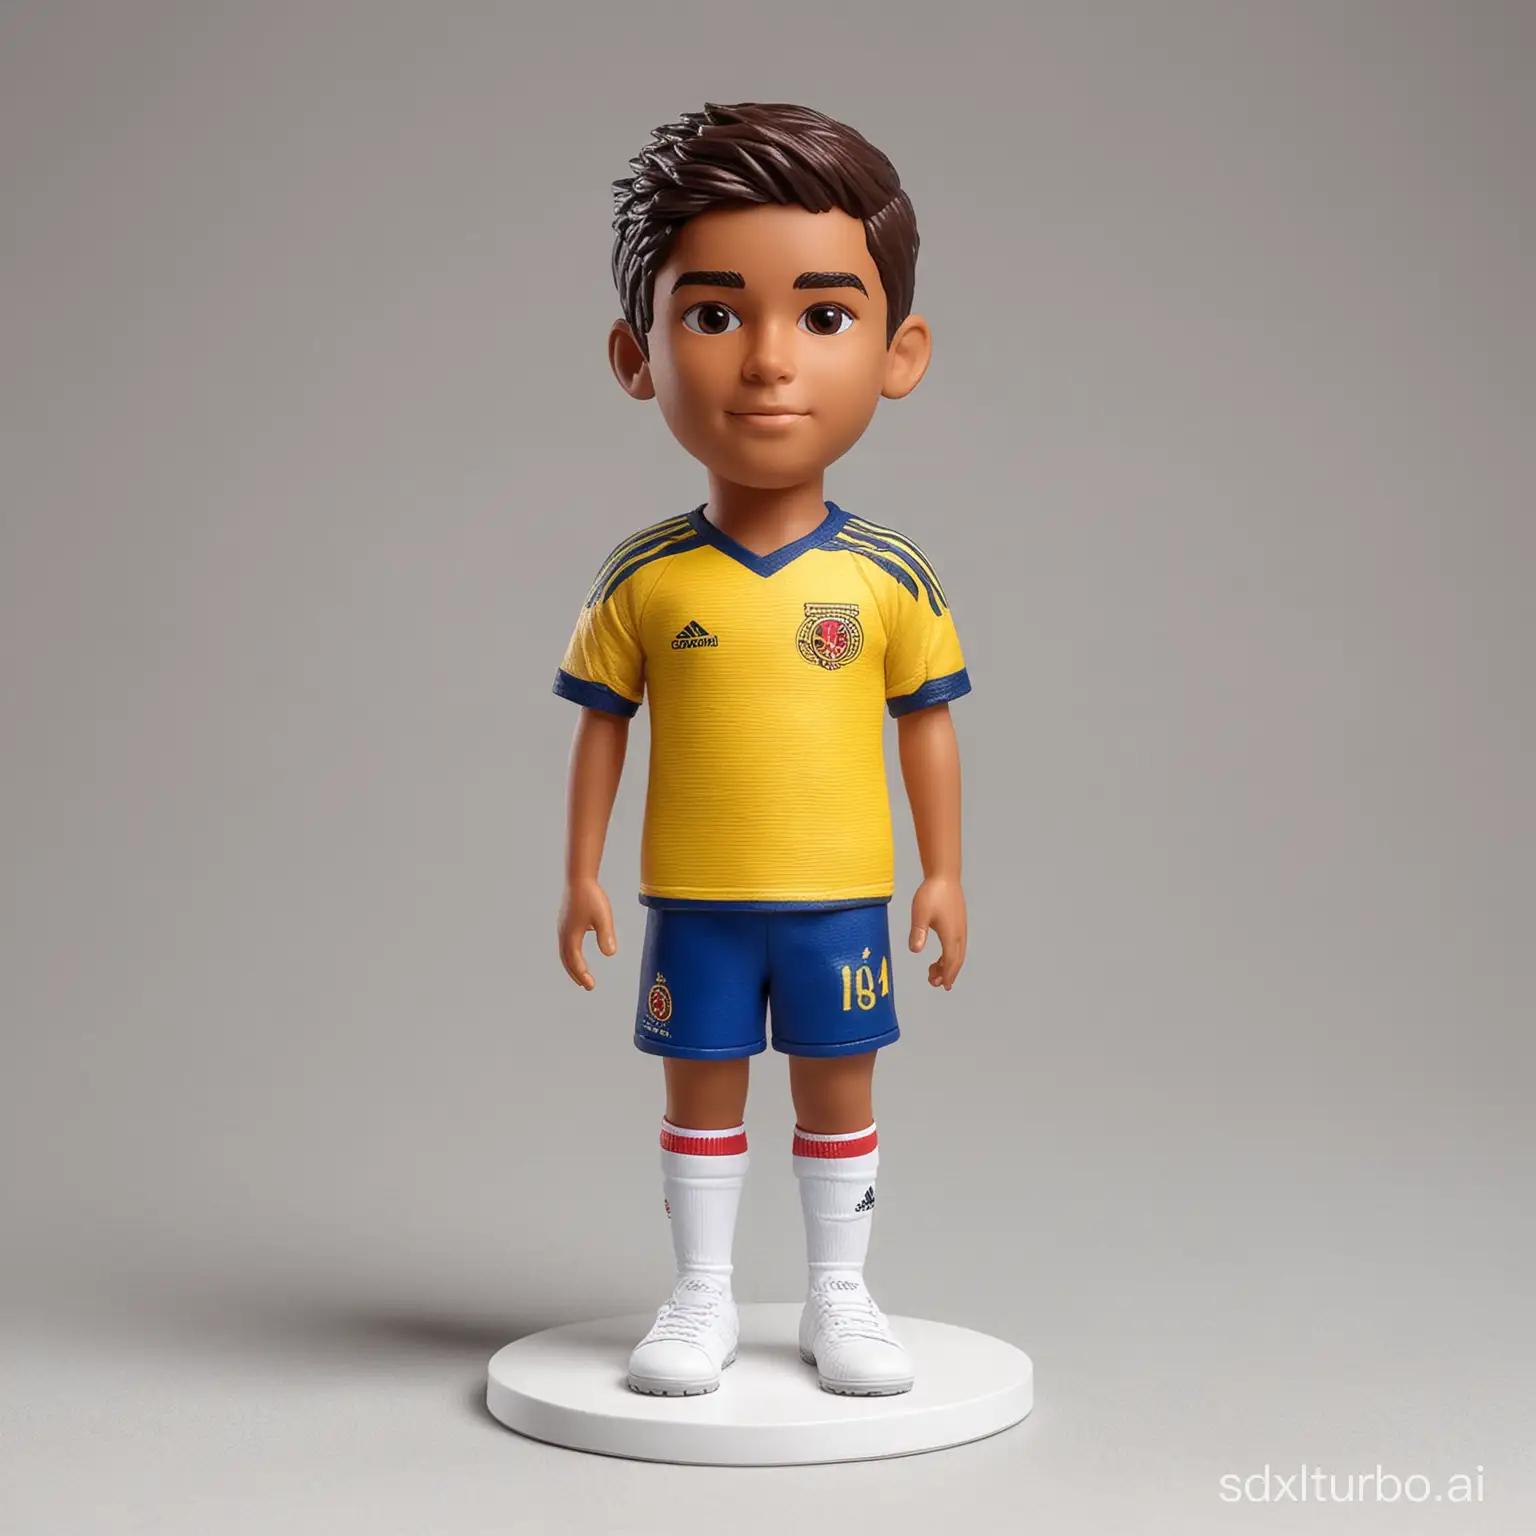 Young-Boy-Wearing-Colombia-Football-Shirt-Display